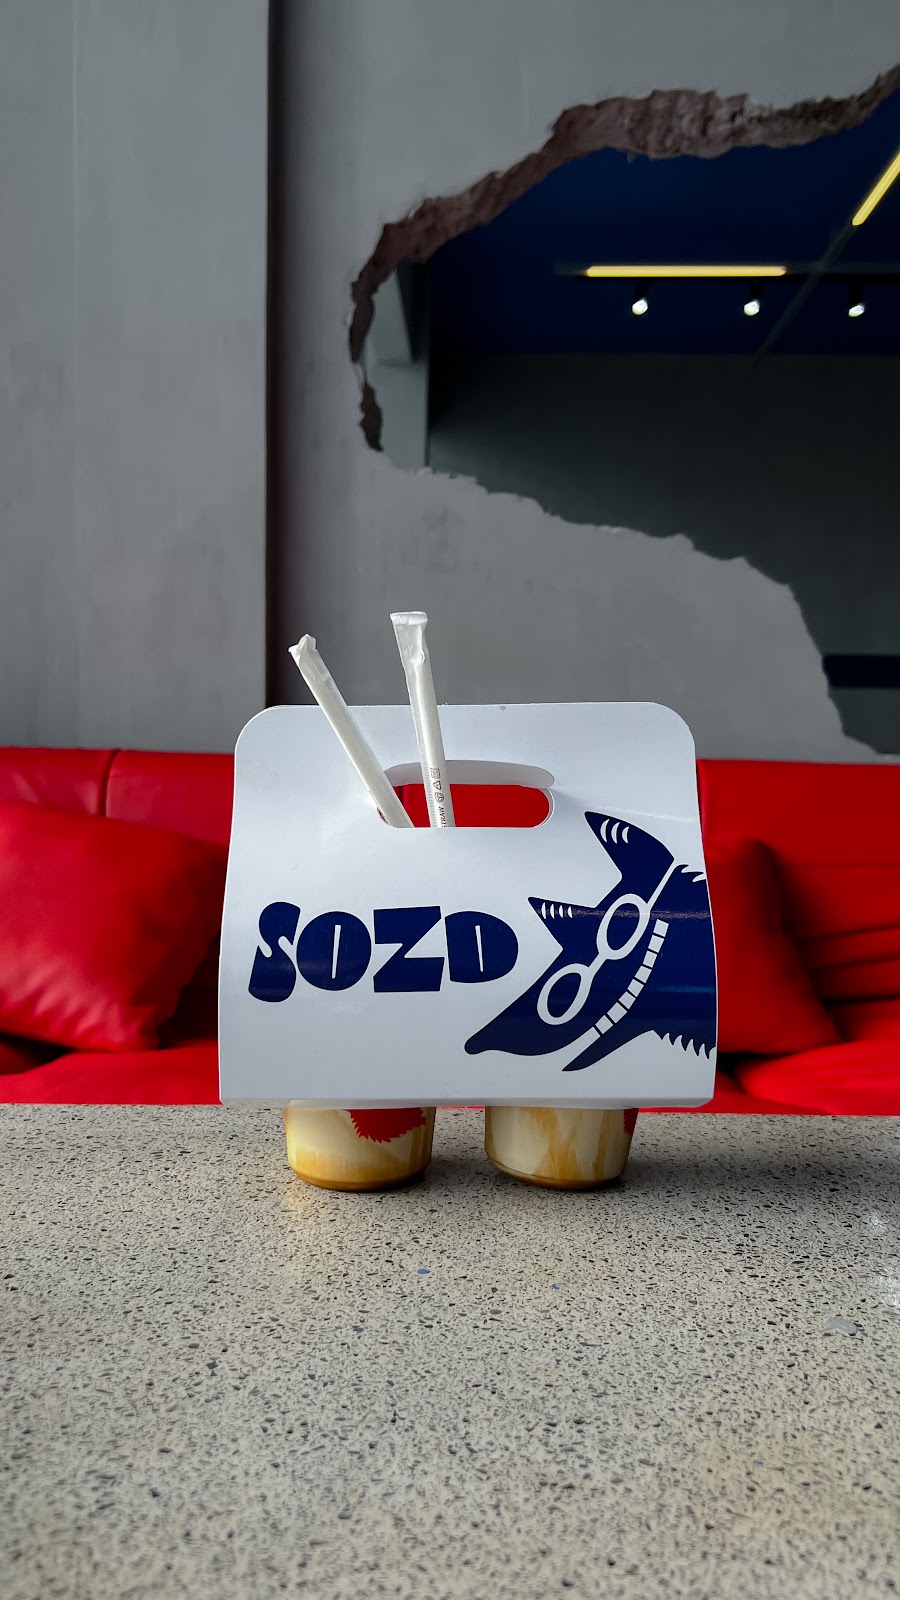 Restaurant Sozd Specialty Coffee and Eatery 10682